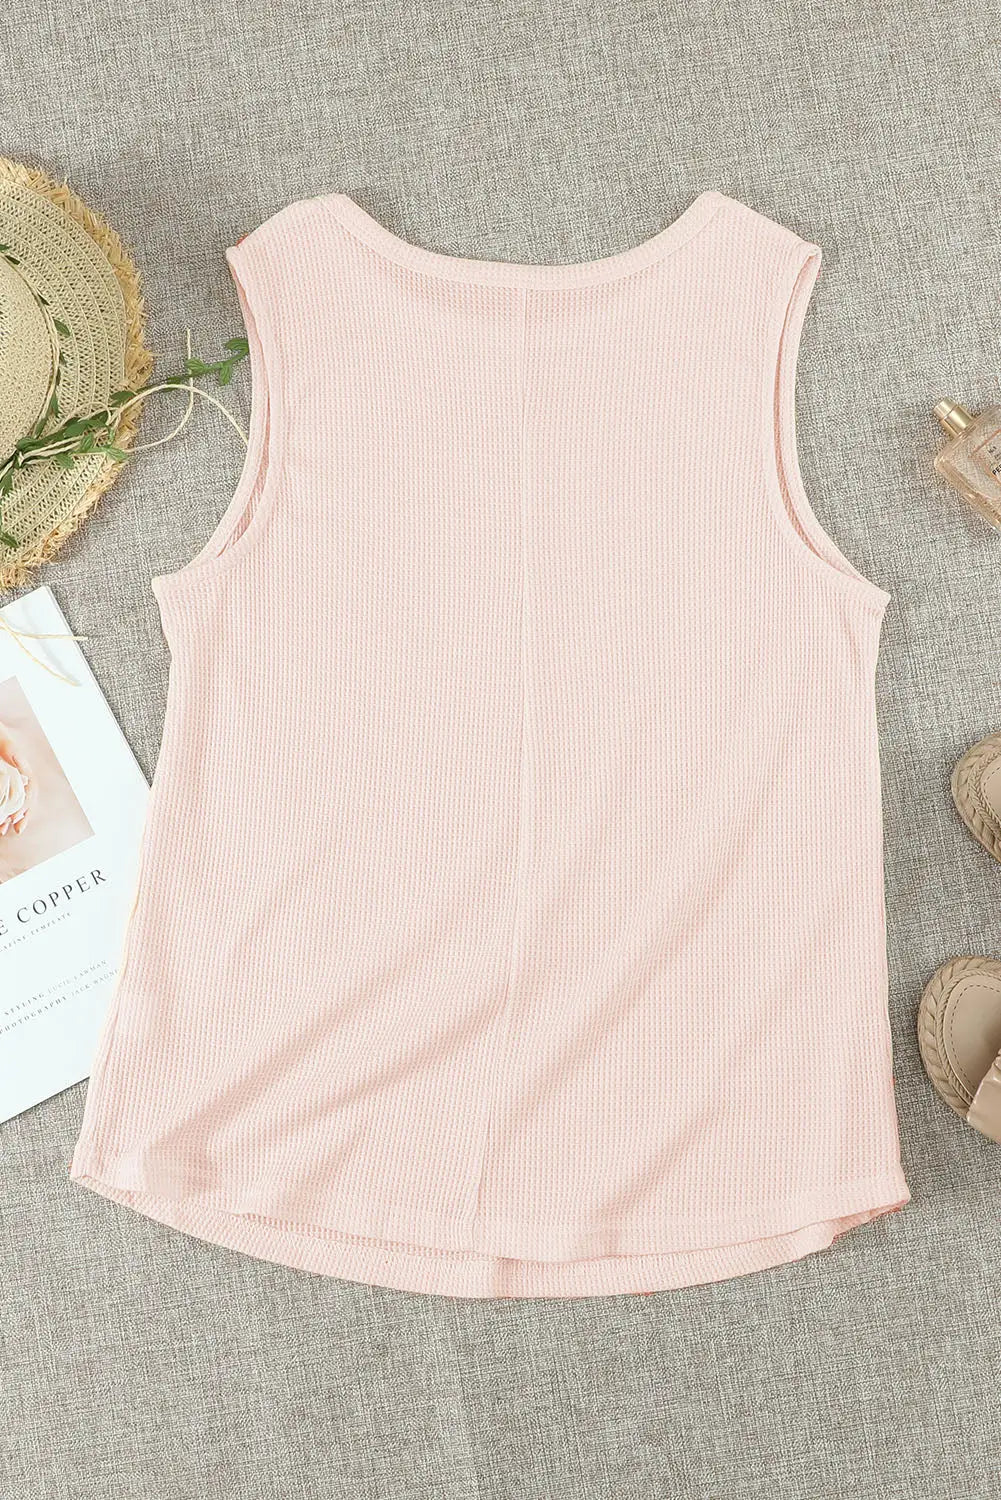 Apricot crew neck waffle tank top - tops